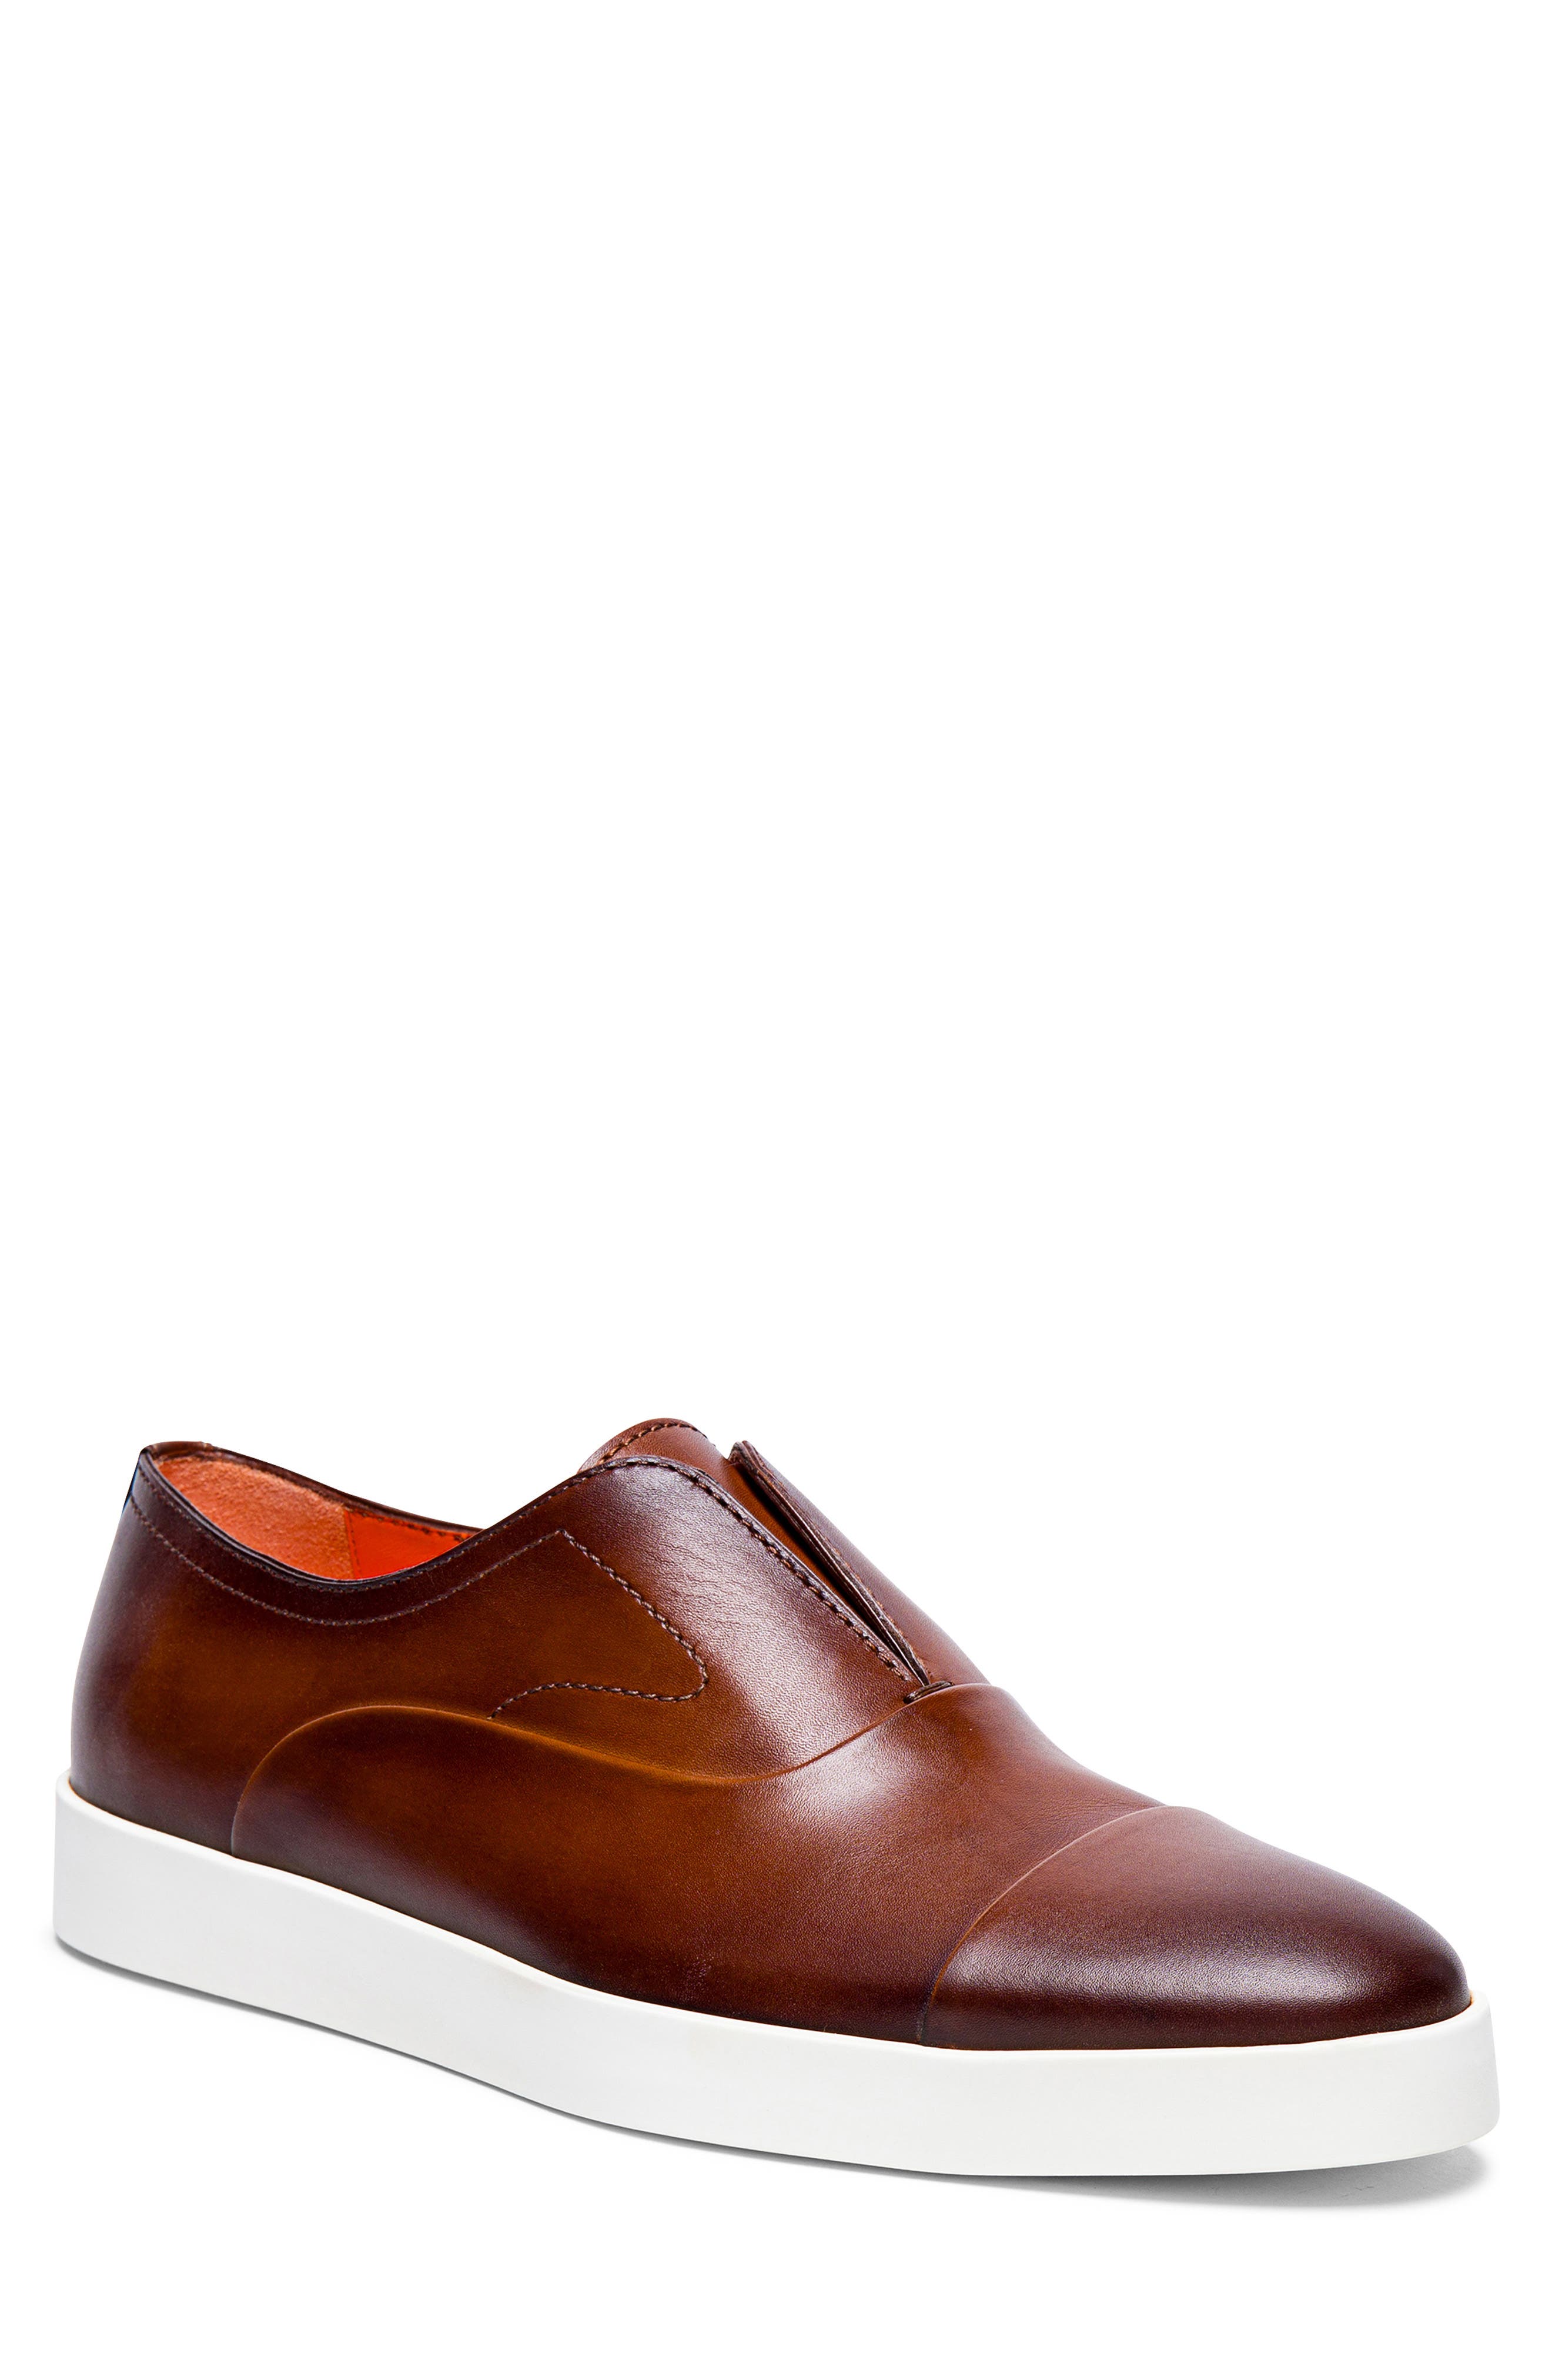 Santoni grained-leather Oxford shoes - Brown